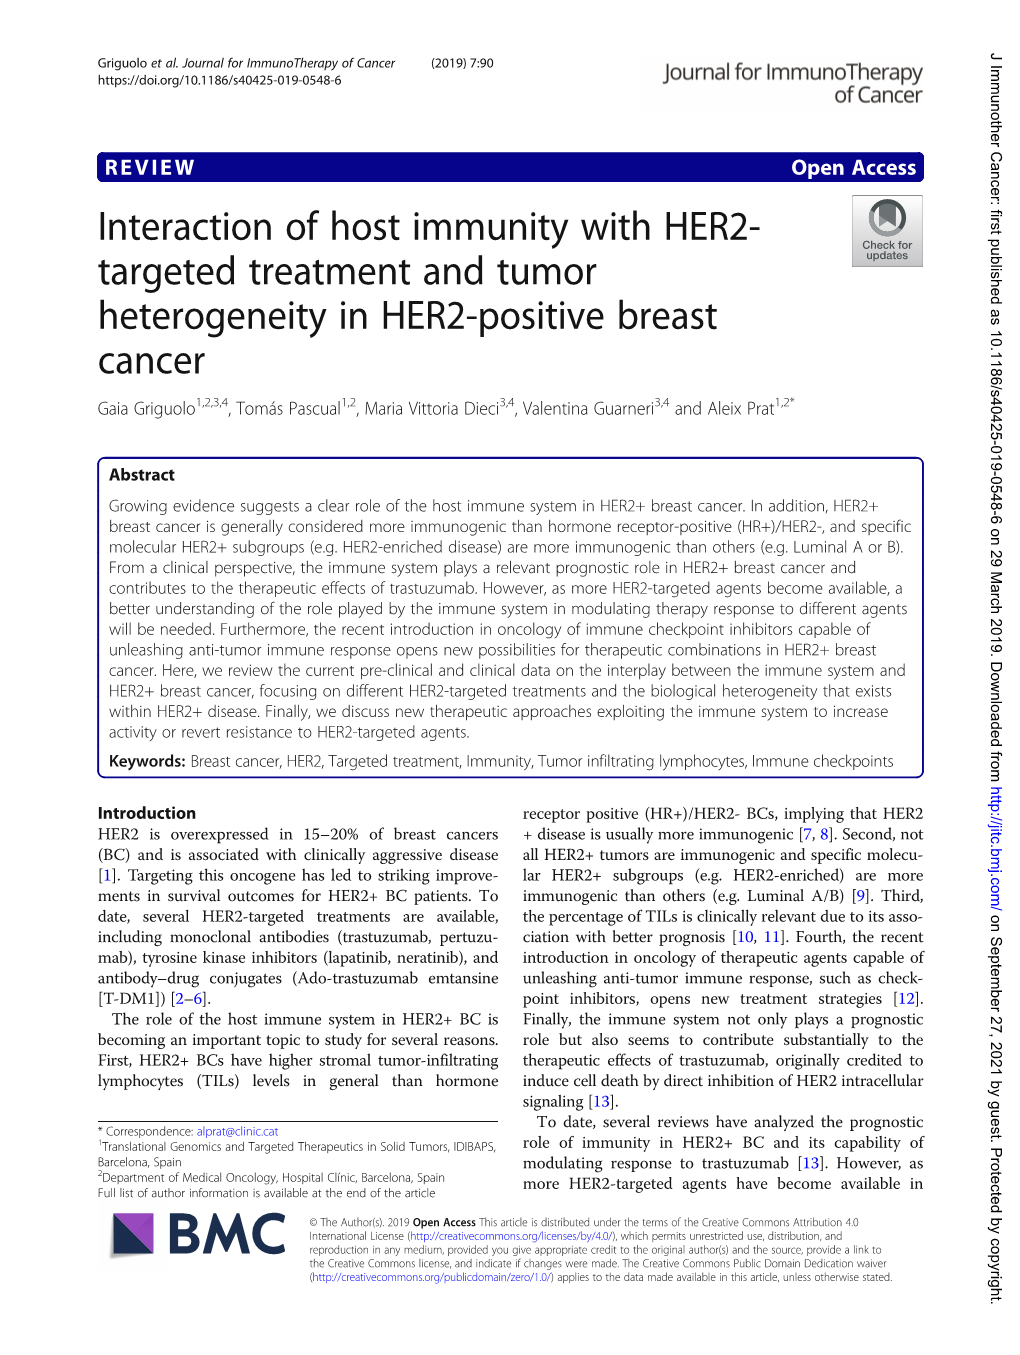 Interaction of Host Immunity with HER2-Targeted Treatment and Tumor